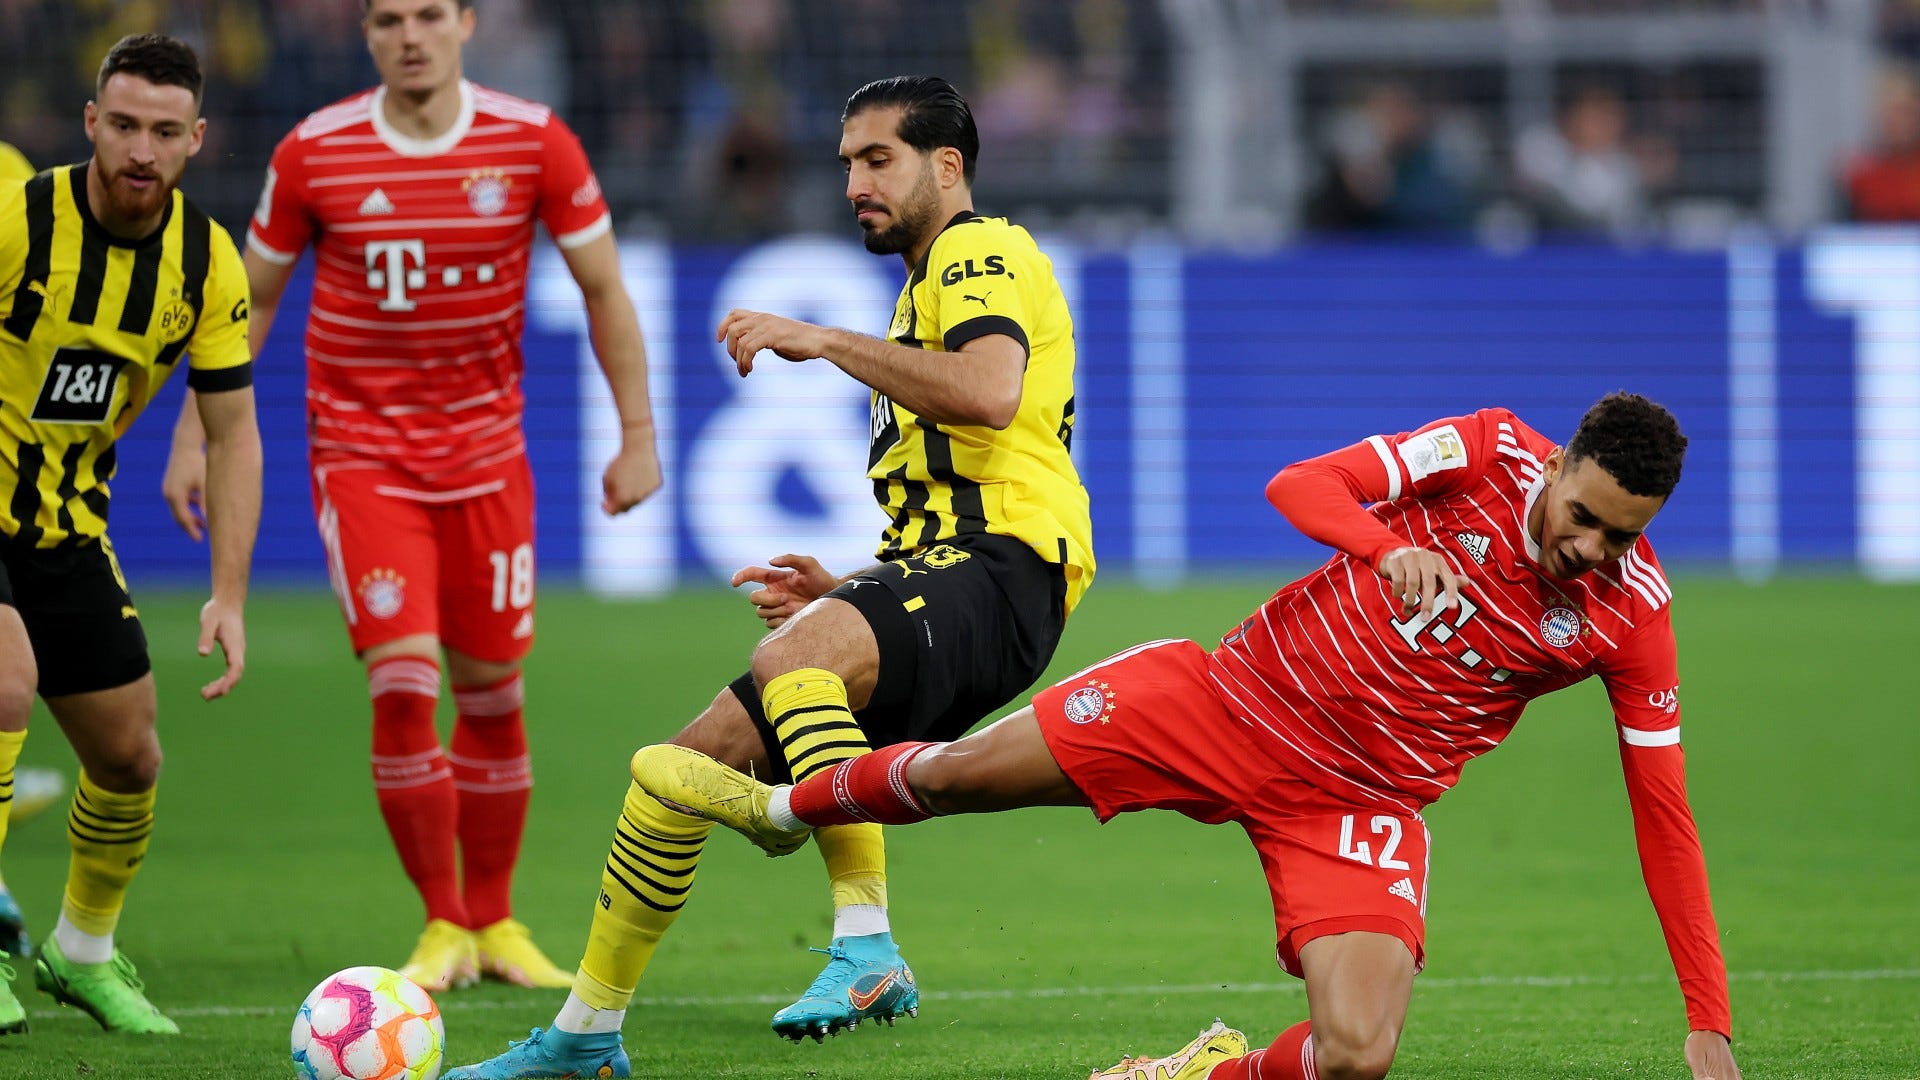 Bayern Munich vs Borussia Dortmund Where to watch the match online, live stream, TV channels and kick-off time Goal